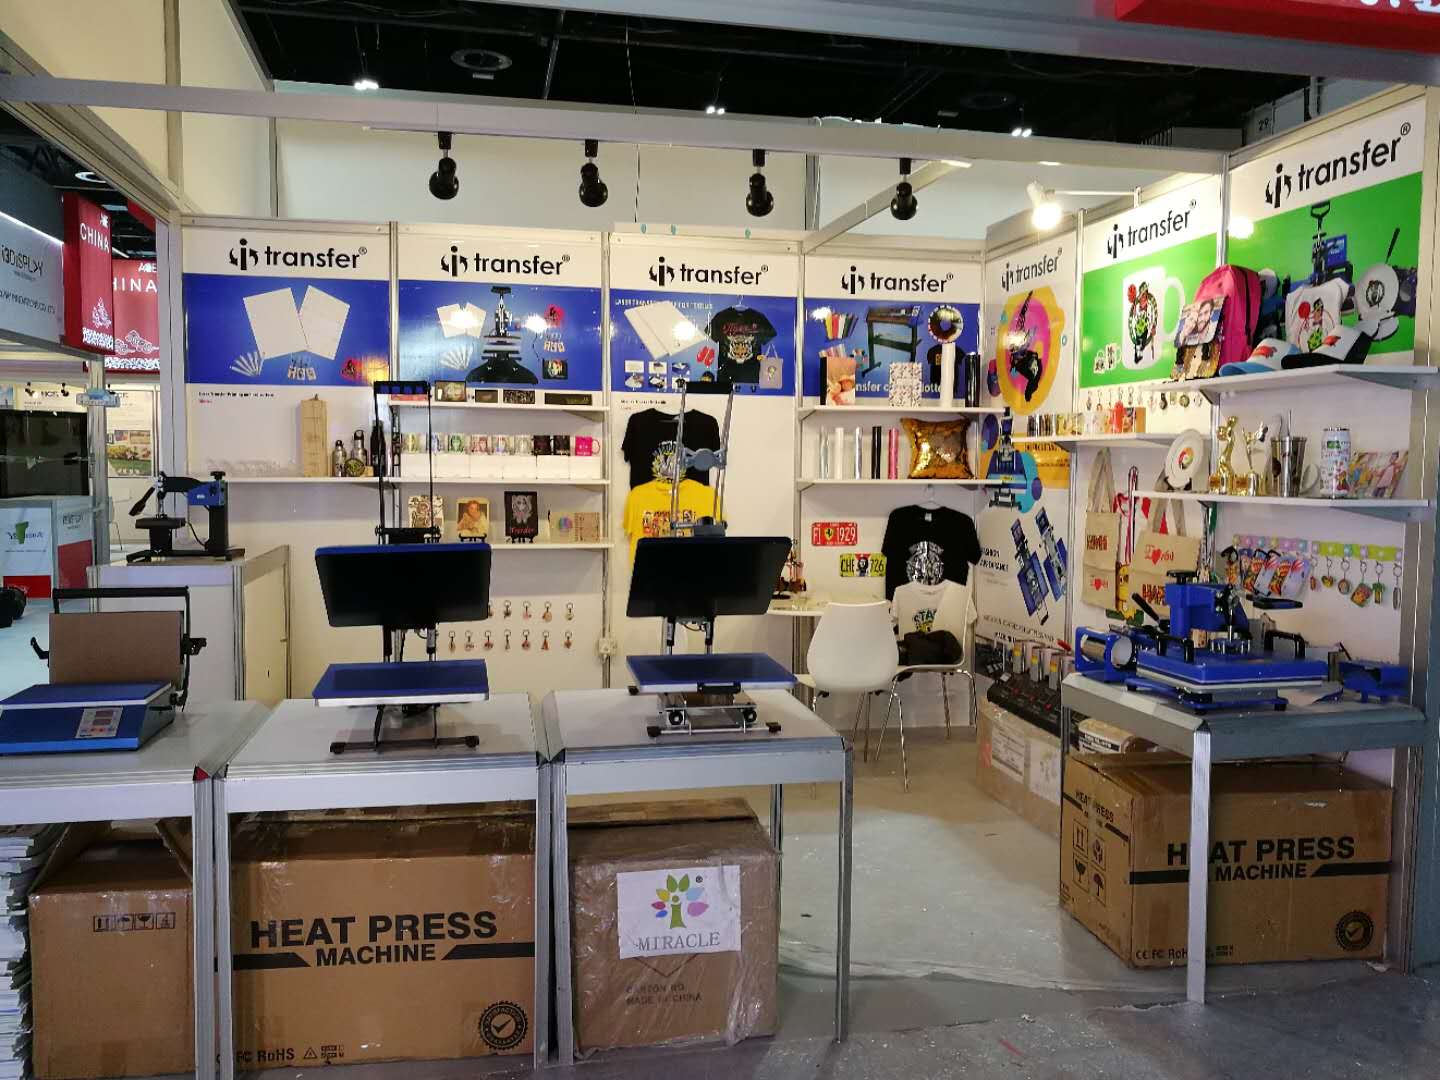 Review of Sign &Graphic Imaging Dubai 2018